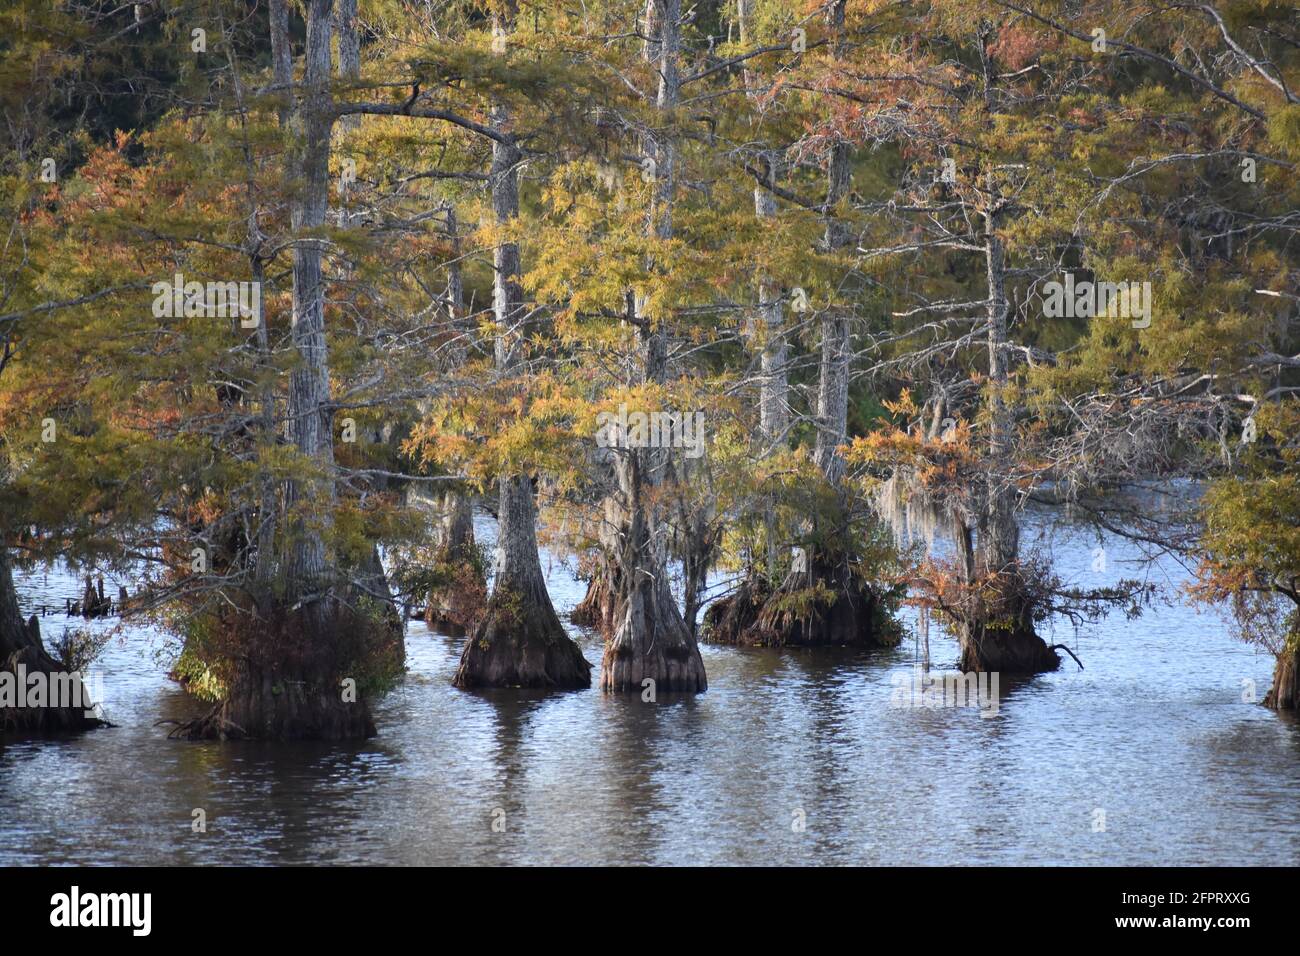 cypress trees in the black bayou Stock Photo